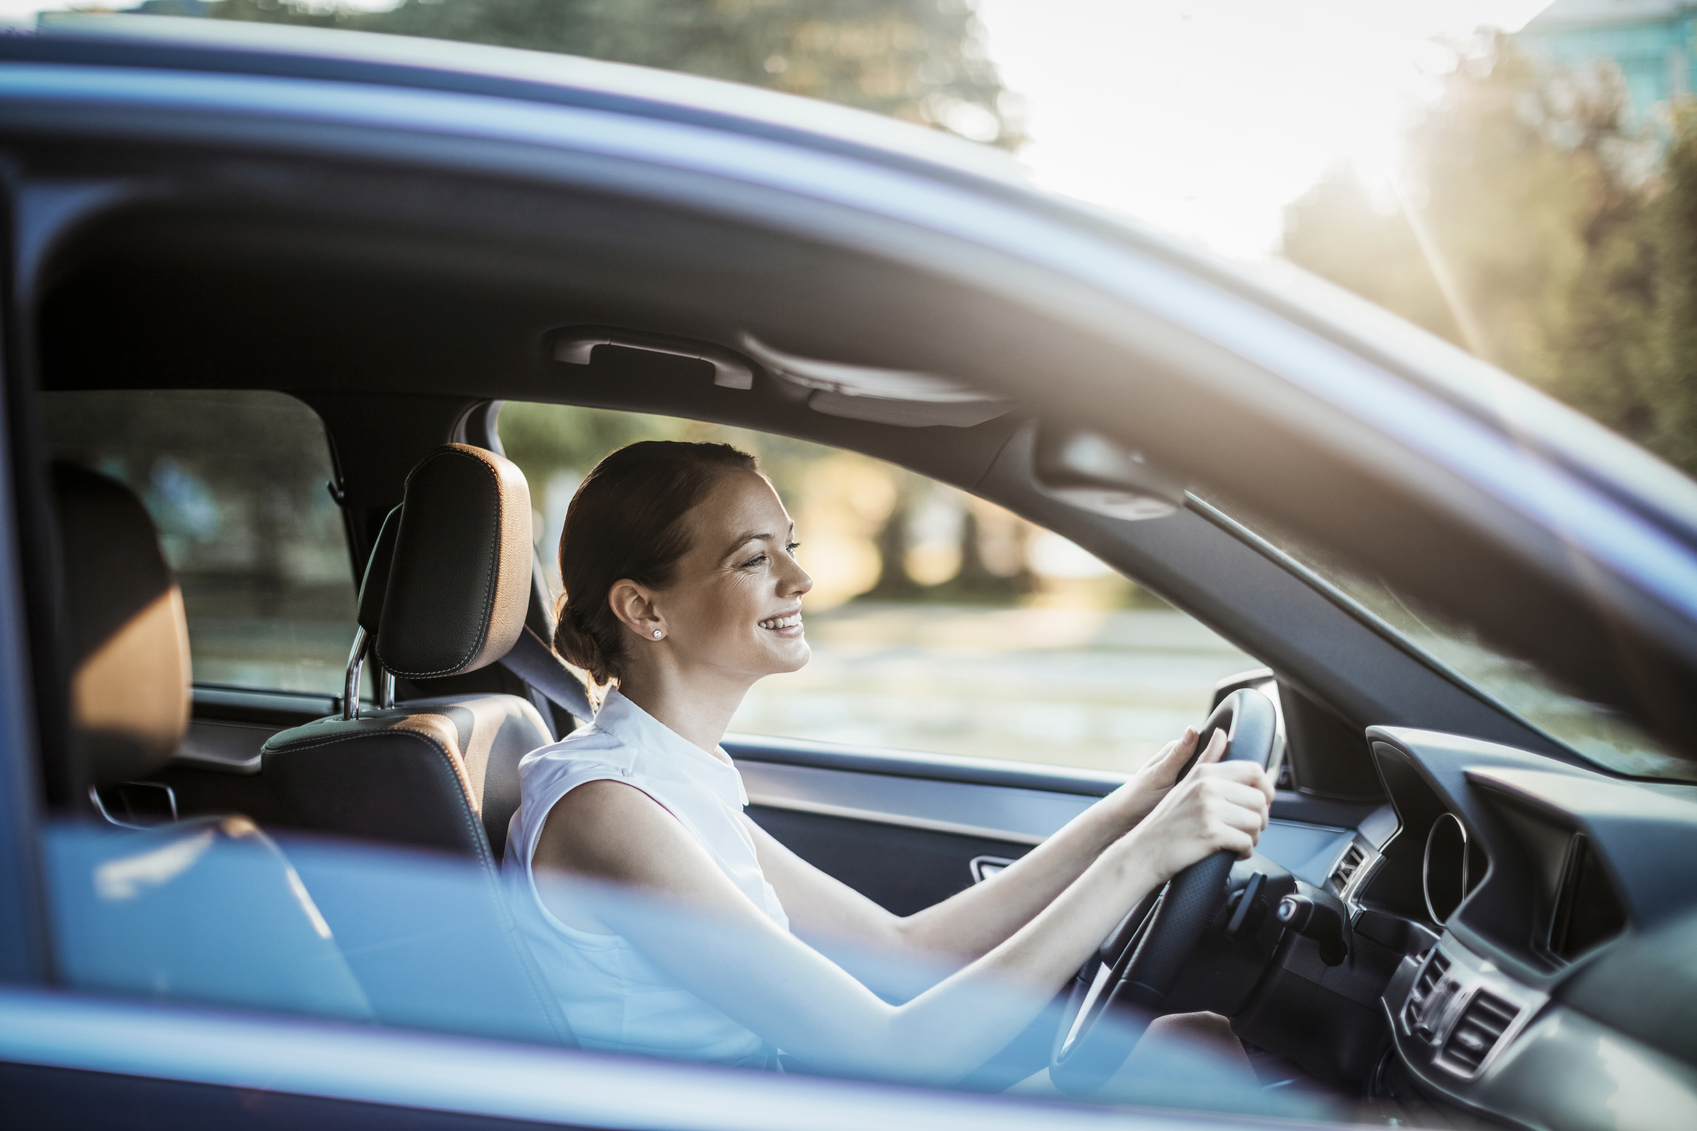 Should You Get Preapproved for a Car Loan? - Experian